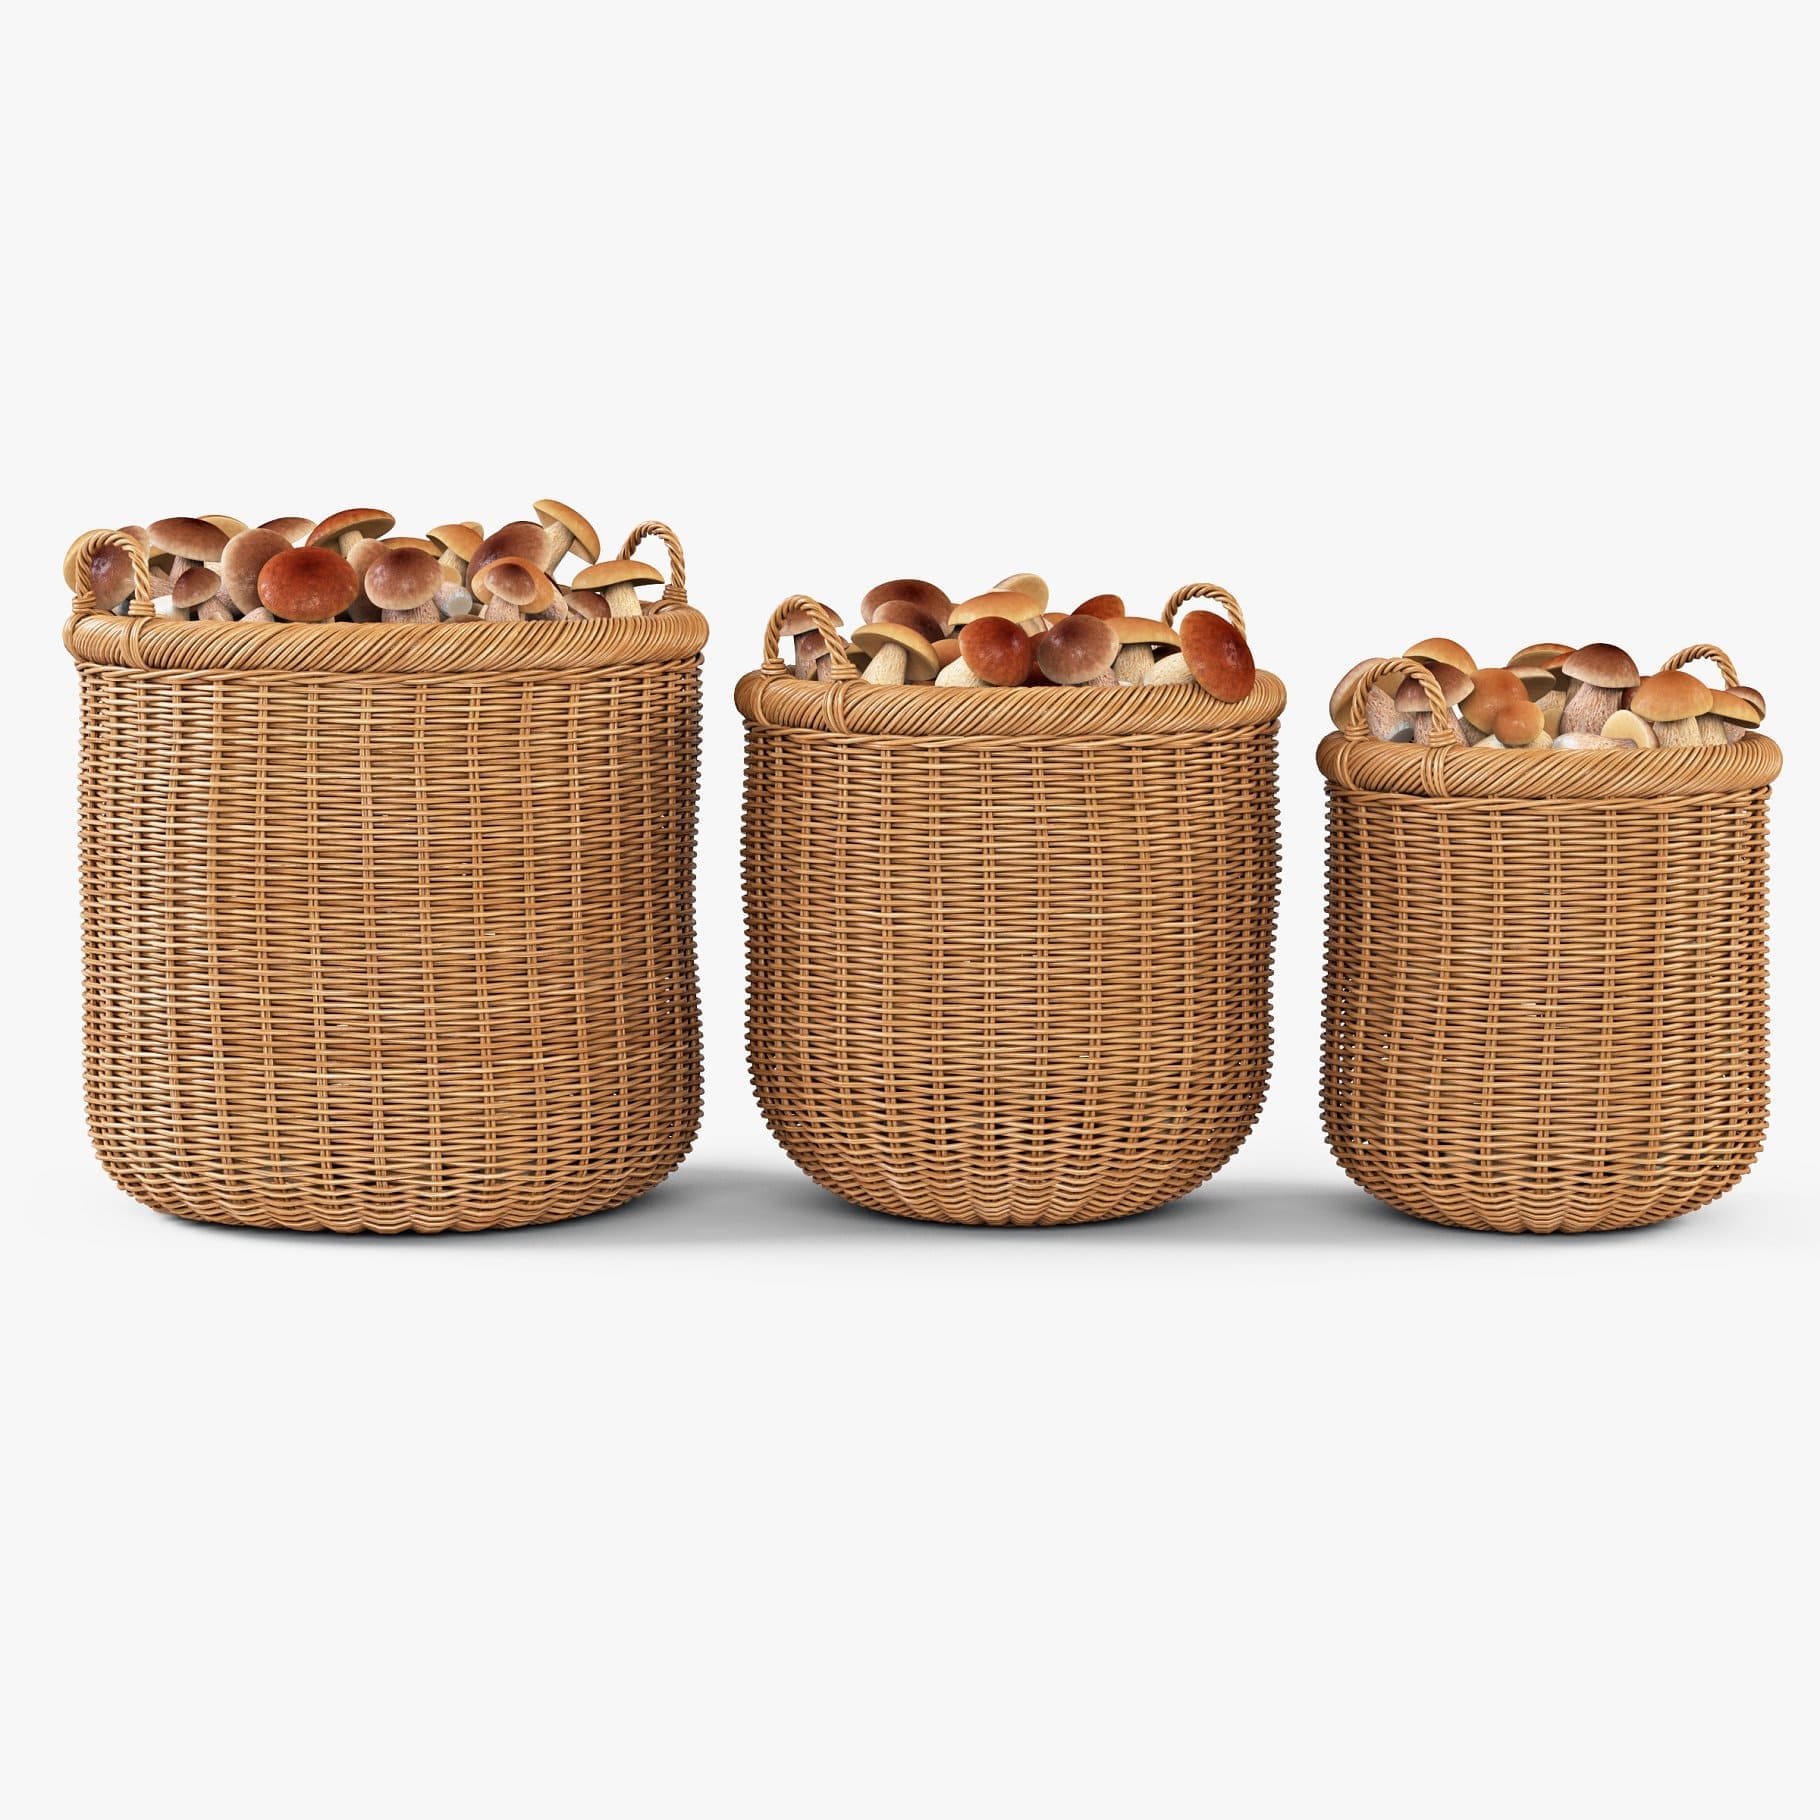 High wicker baskets with mushrooms.